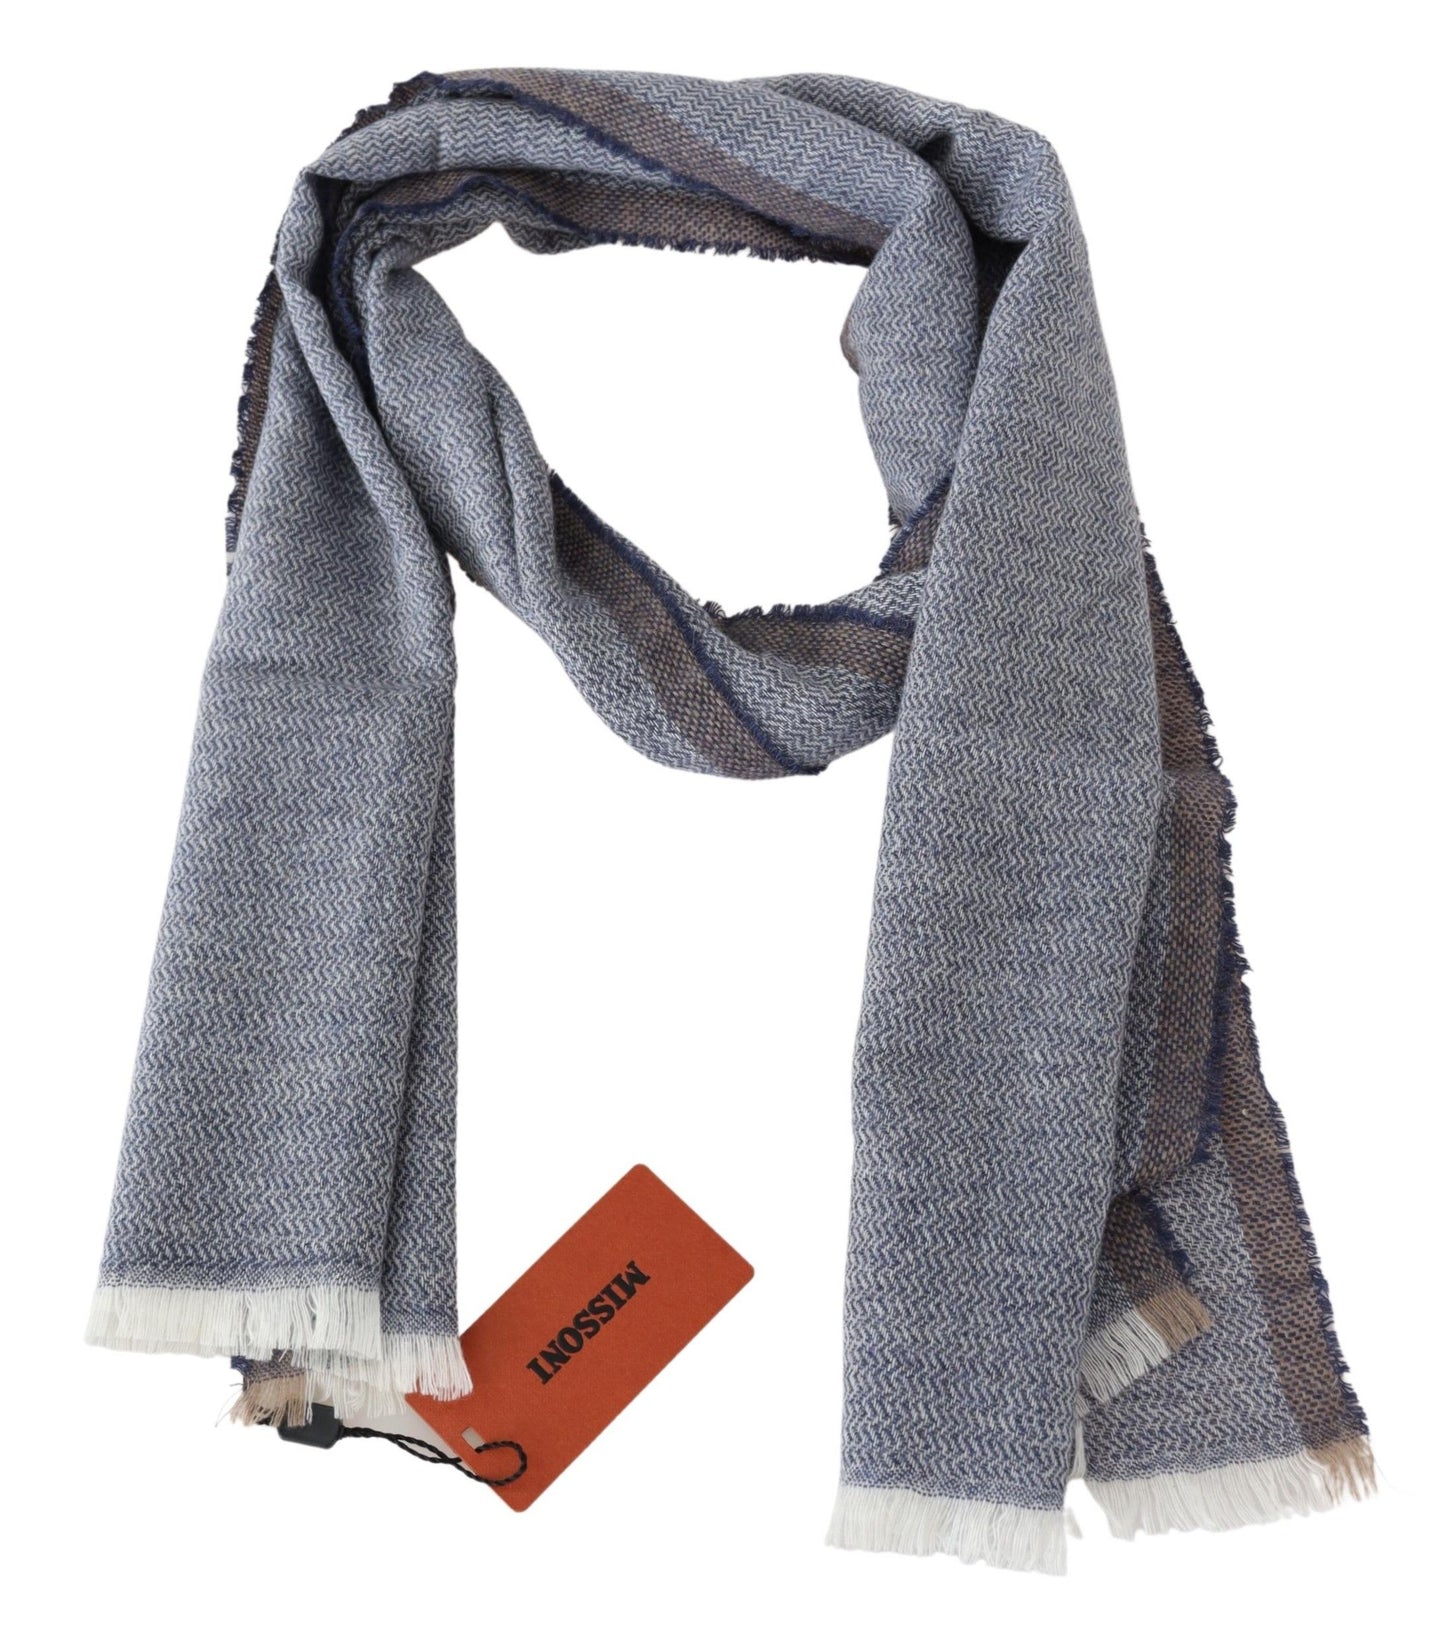 Elegant Gray Wool Scarf with Stripes and Fringes